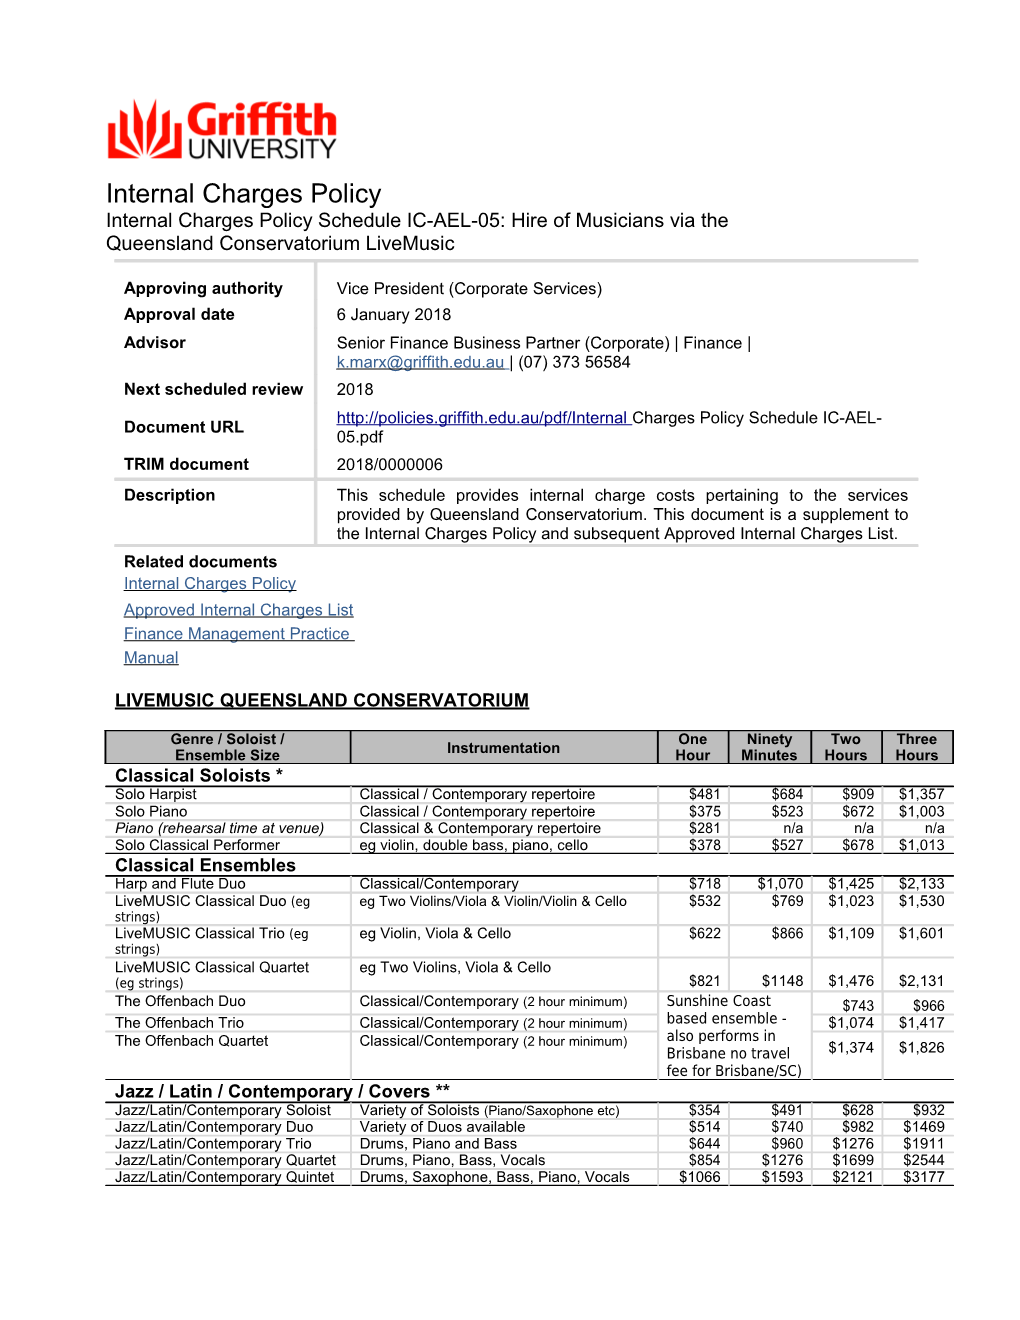 Internal Charges Policy Schedule IC-AEL-05